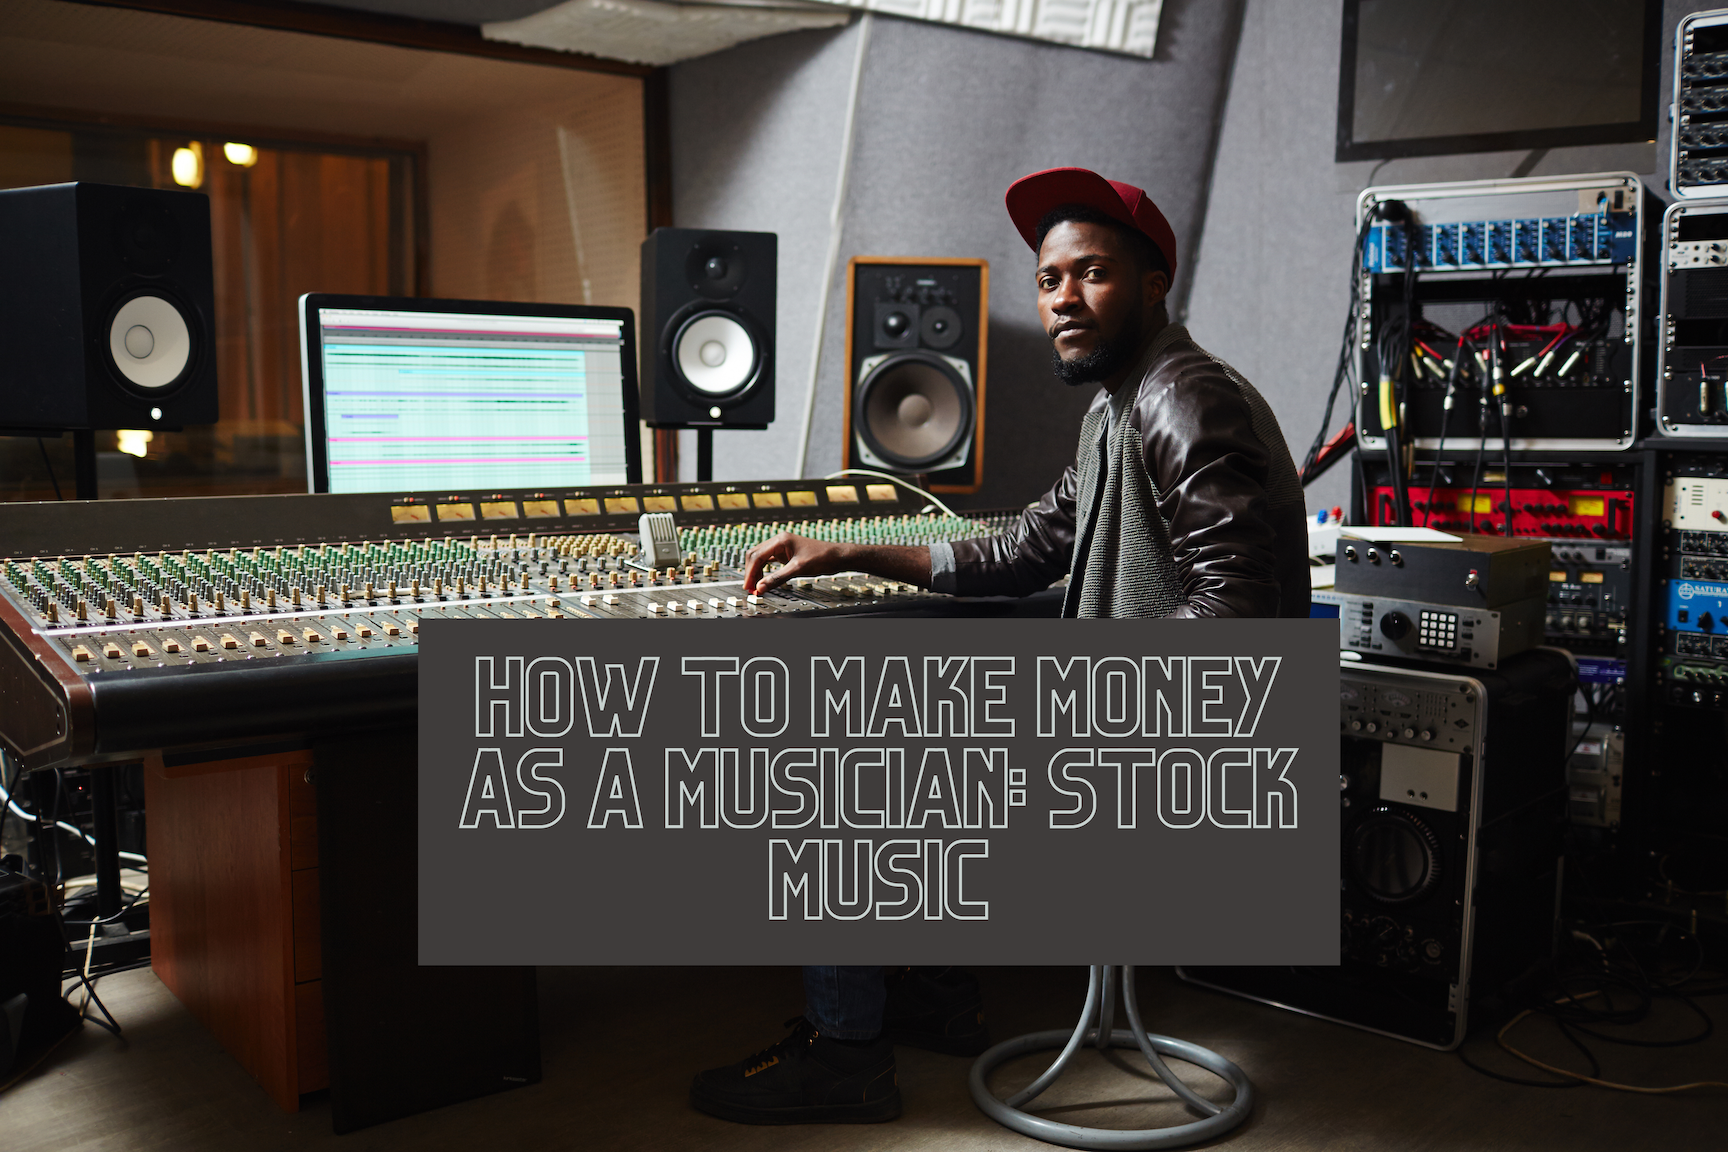 How to Make Money as a Musician: Stock Music